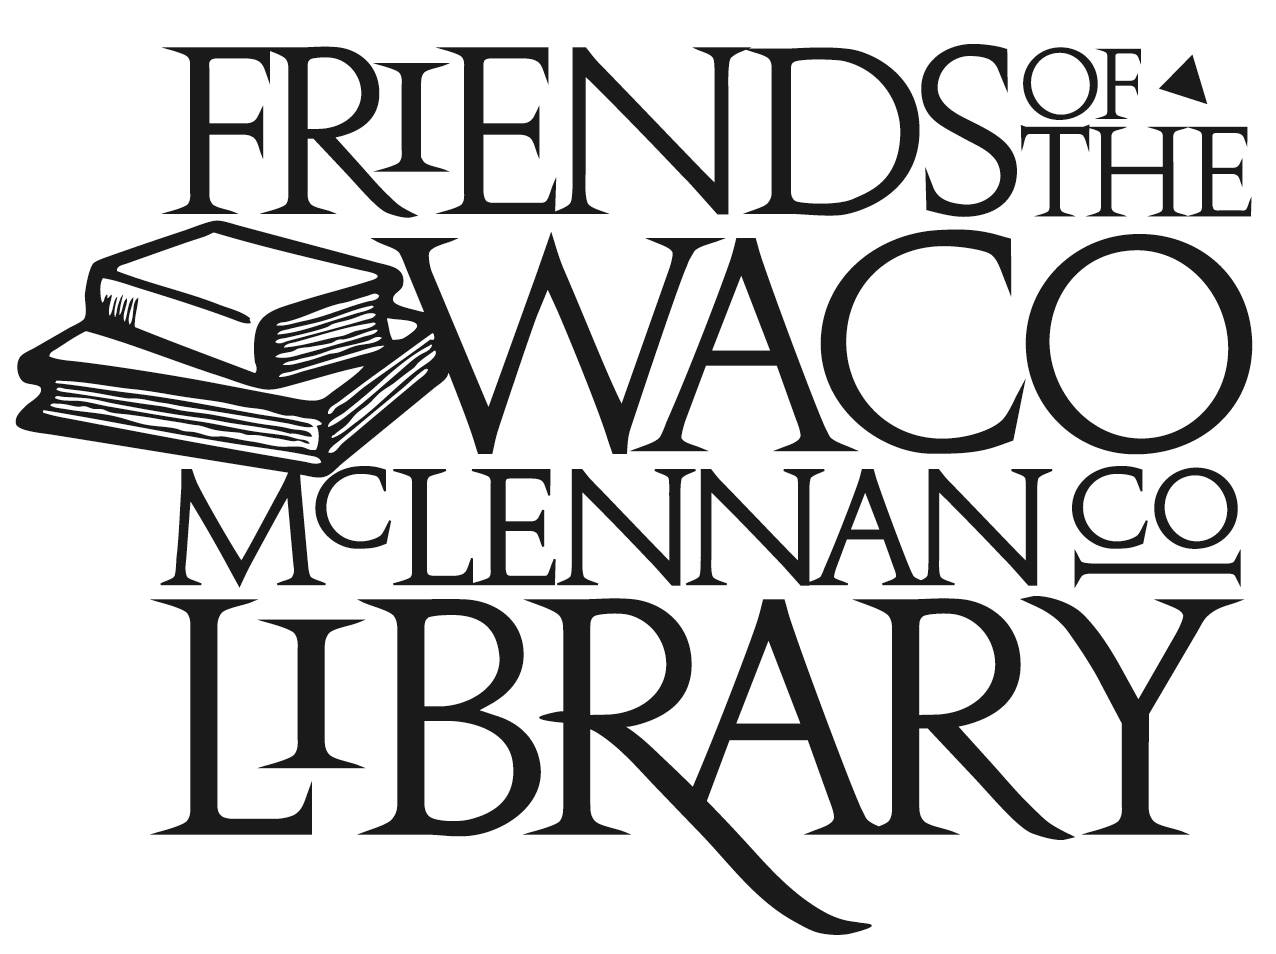 Friends of the Waco McLennan County Library